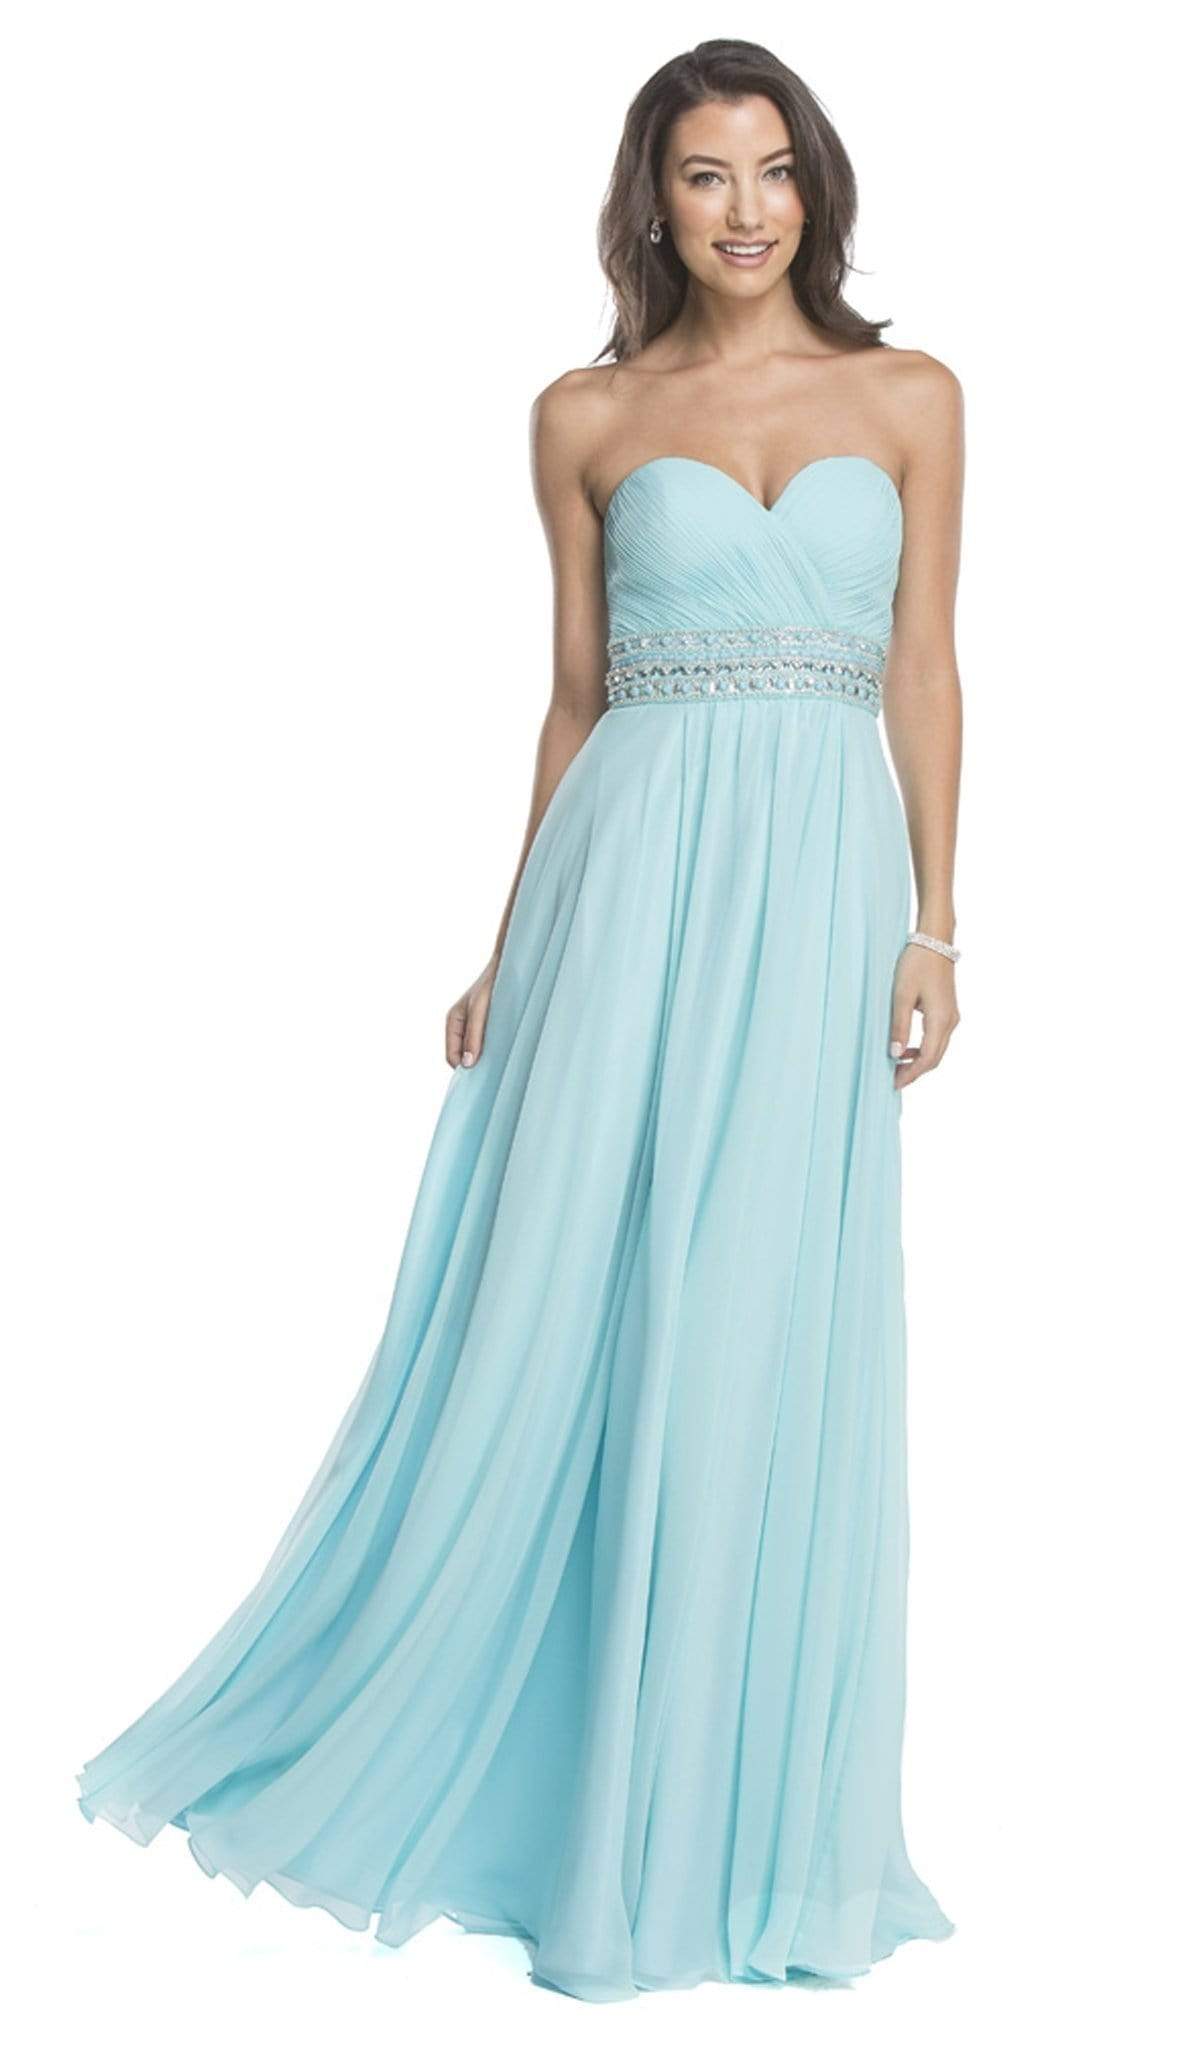 Image of Aspeed Design - Pleated Strapless Sweetheart Prom A-line Gown